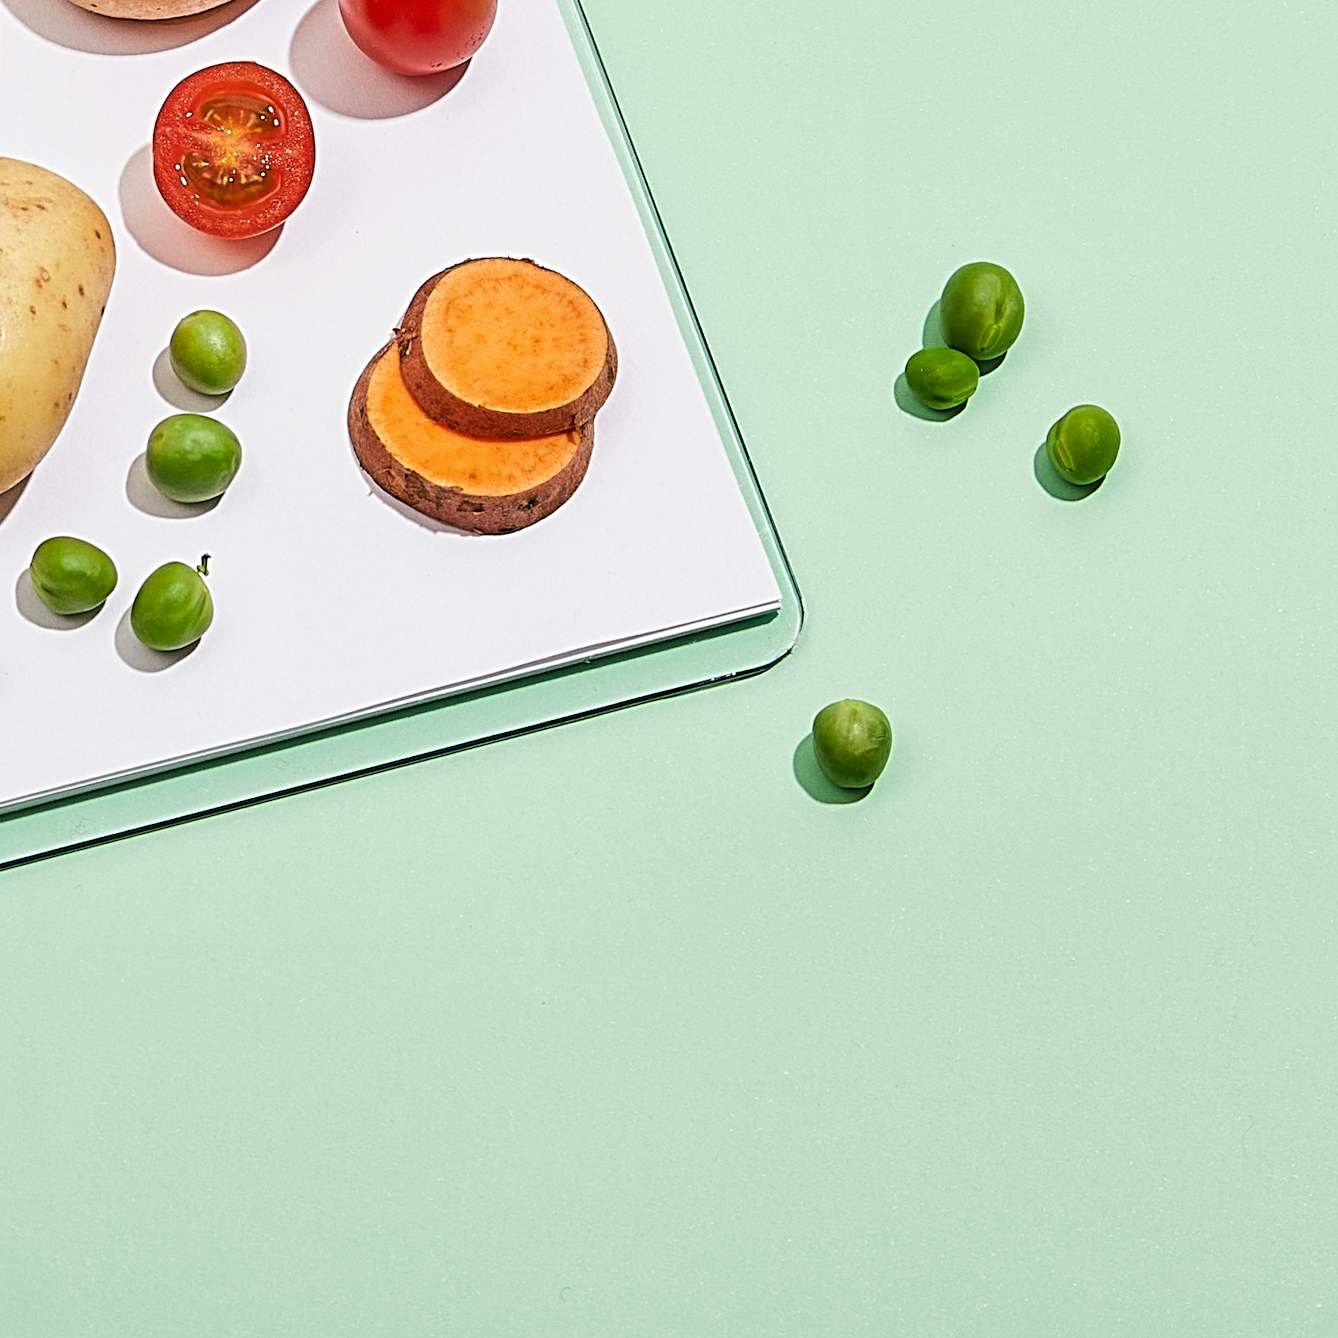 Photograph of the lower corner of a clipboard resting on a light green background. On top of the paper  attached to clipboard is a whole potato, a stack of sliced sweet potato, whole and halved cherry tomatoes and green peas. Loose on the background, to the right of the clipboard are a scattering of loose green peas.